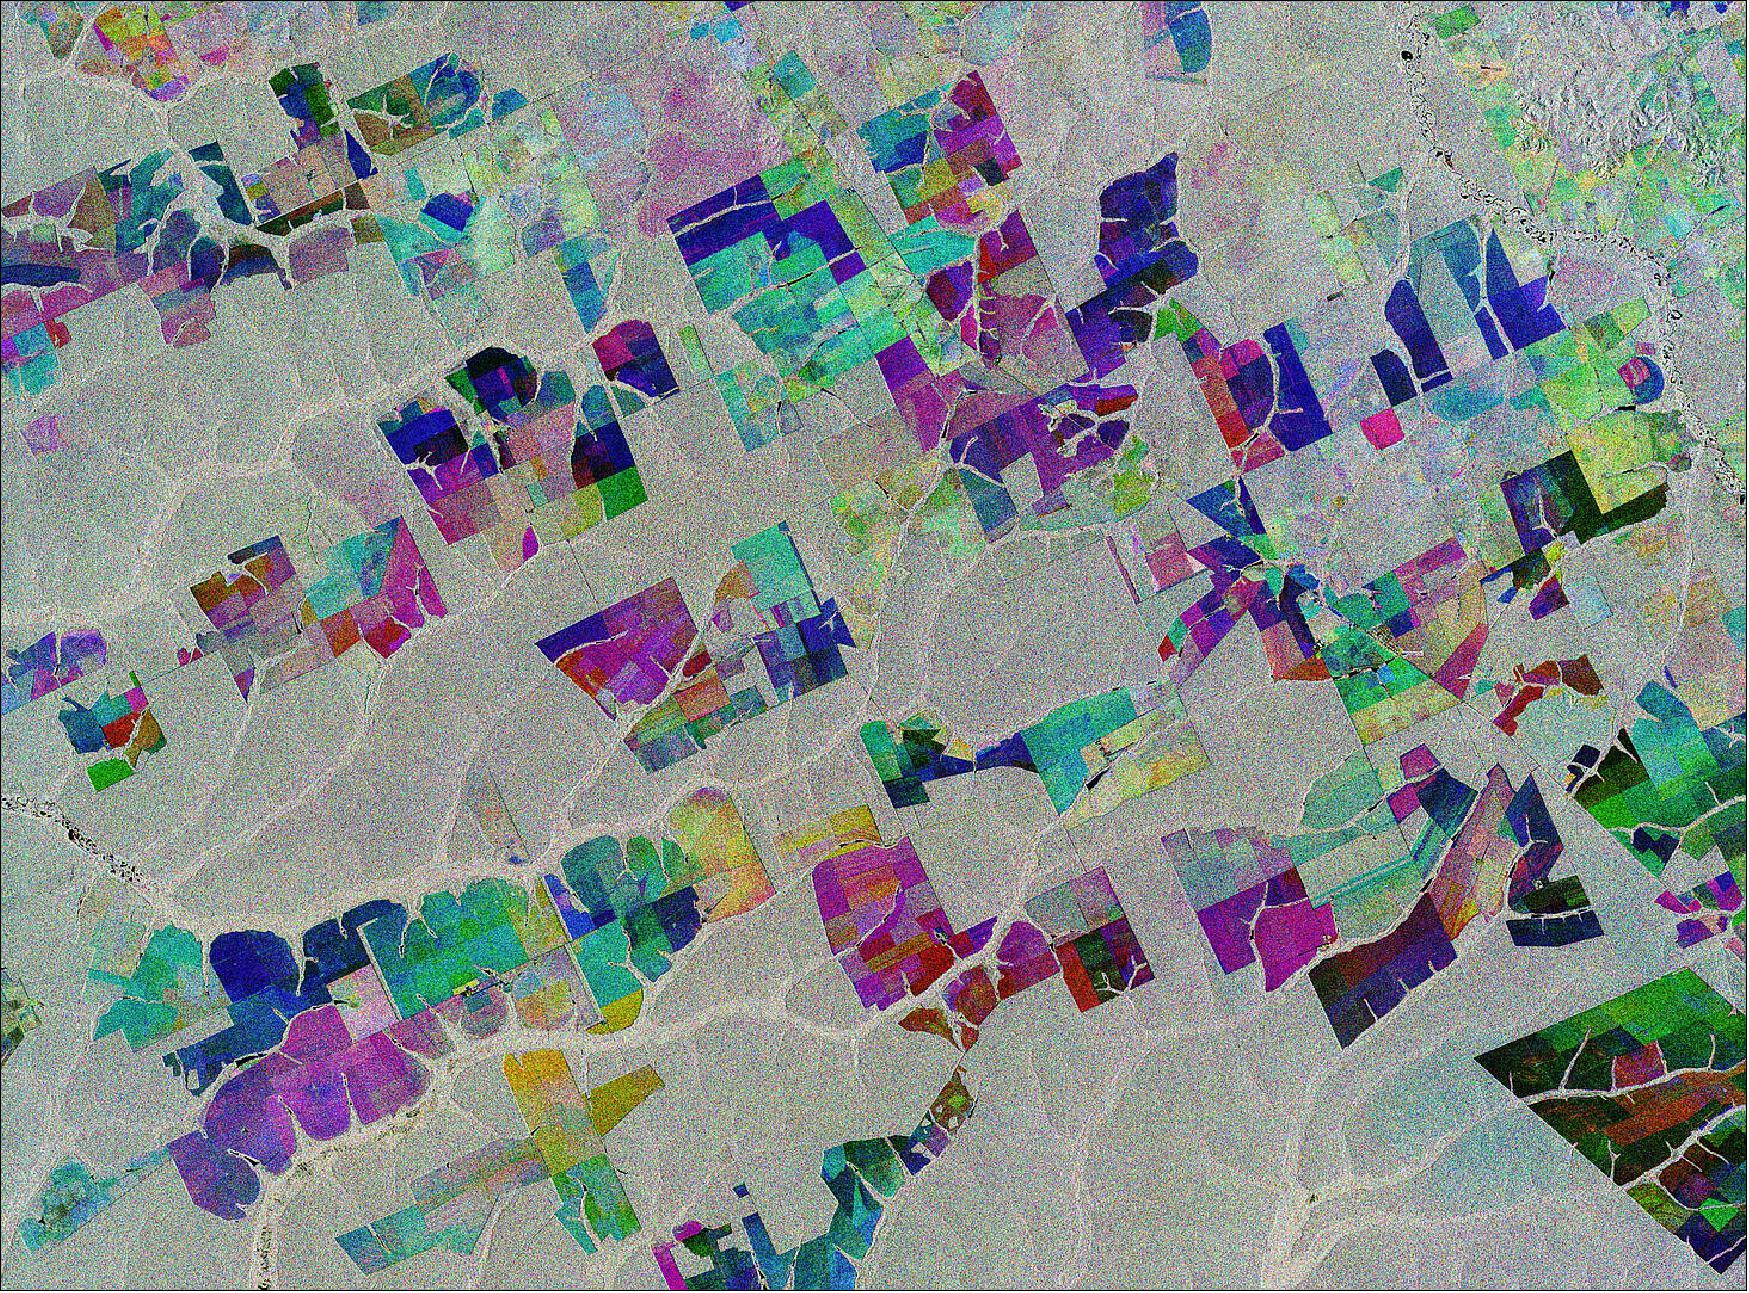 Figure 1: This image combines three separate radar images from the Copernicus Sentinel-1 mission taken about two years apart to show change in crops and land cover over time. Unlike images from satellites carrying optical or ‘camera-like’ instruments, images acquired with imaging radar are interpreted by studying the intensity of the backscatter radar signal, which is related to the roughness of the ground. - Here, the first image, from 2 May 2015, is picked out in blue; the second, from 16 March 2017, picks out changes in green; and the third from 18 March 2019 in red; areas in grey depict little or no change between 2015 and 2019. This image is also featured on the Earth from Space video program (image credit: ESA, the image contains modified Copernicus Sentinel data (2015-19), processed by ESA, CC BY-SA 3.0 IGO)